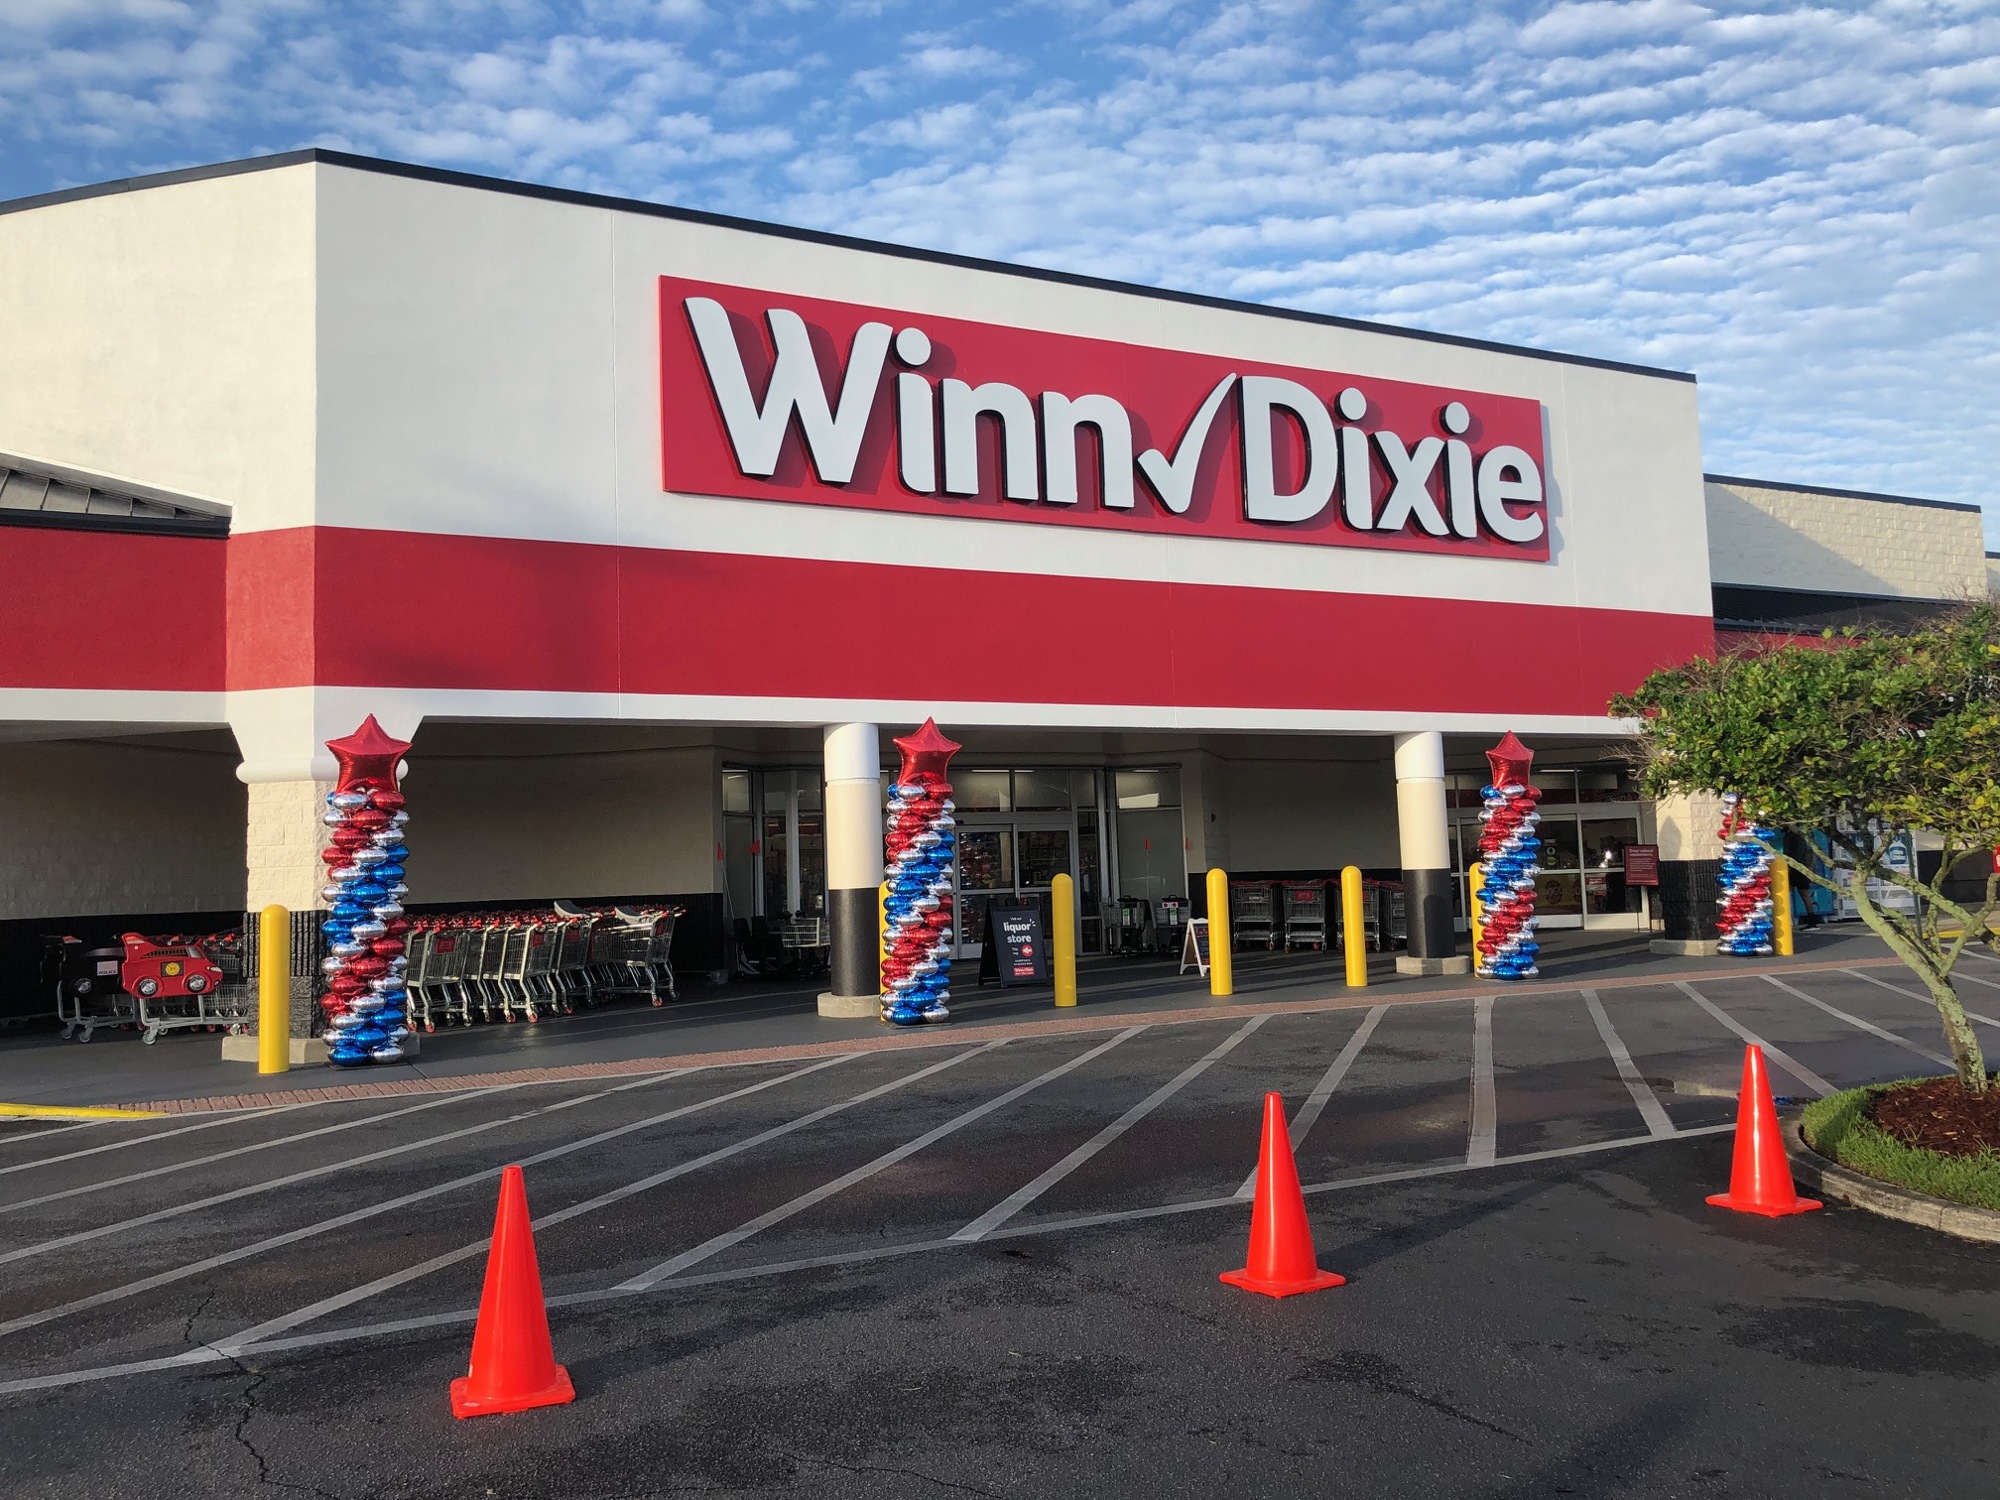 Winn-Dixie opened a remodeled store and new liquor store at its 11380 Beach Blvd. location.